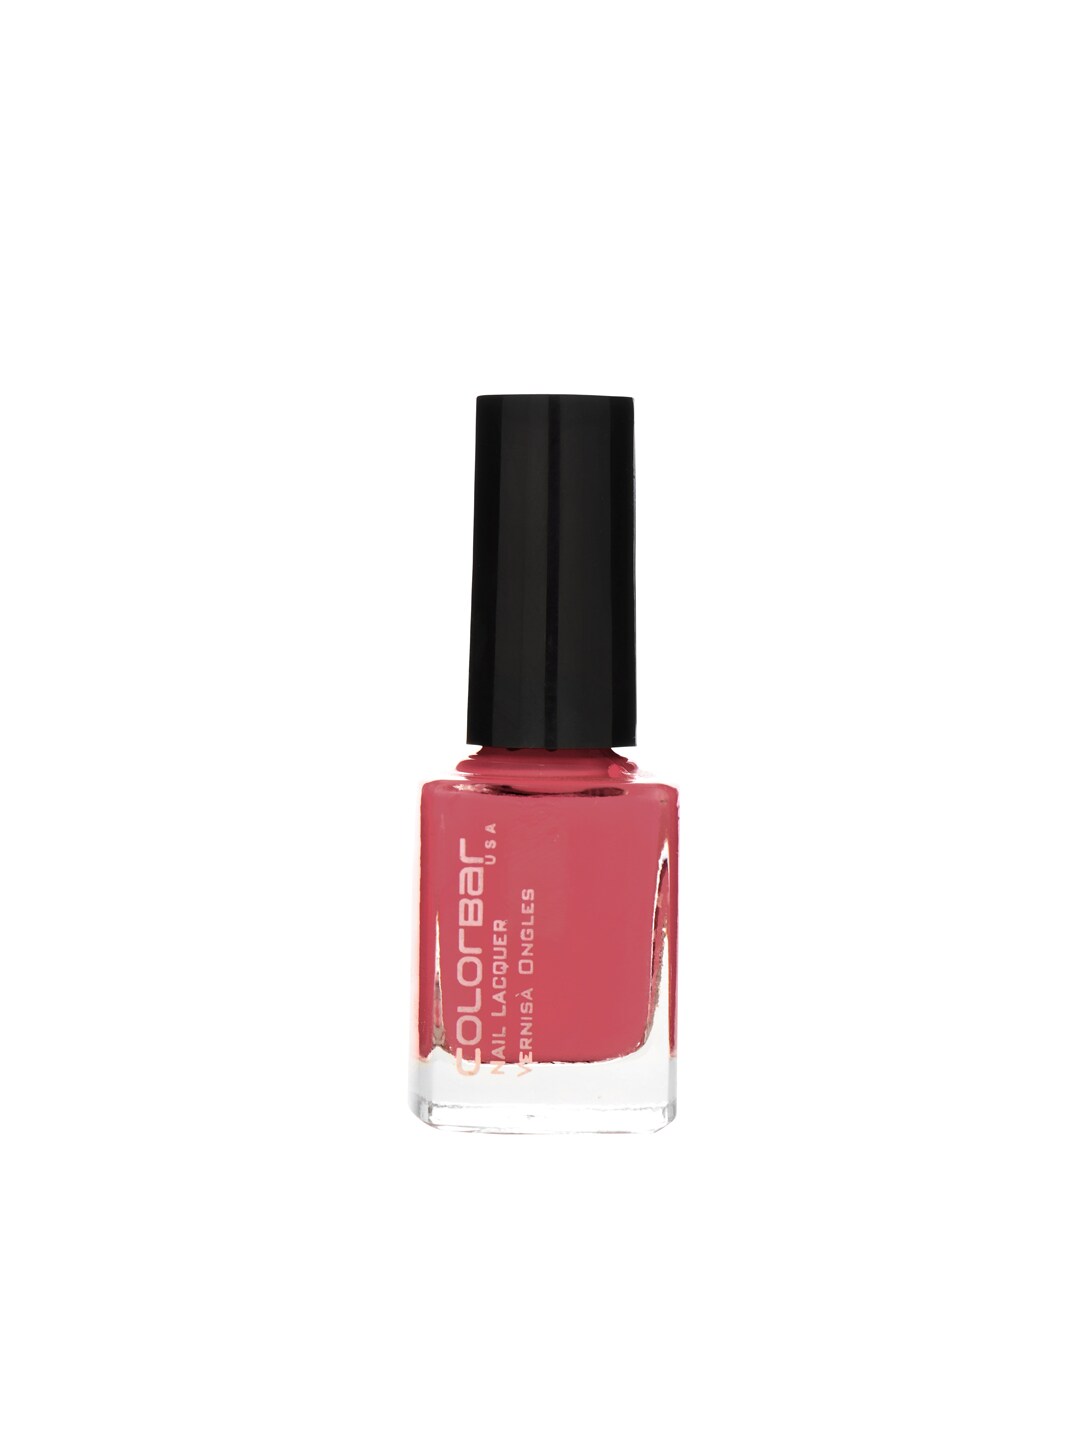 Colorbar Sizzling Pink Nail Lacquer 24